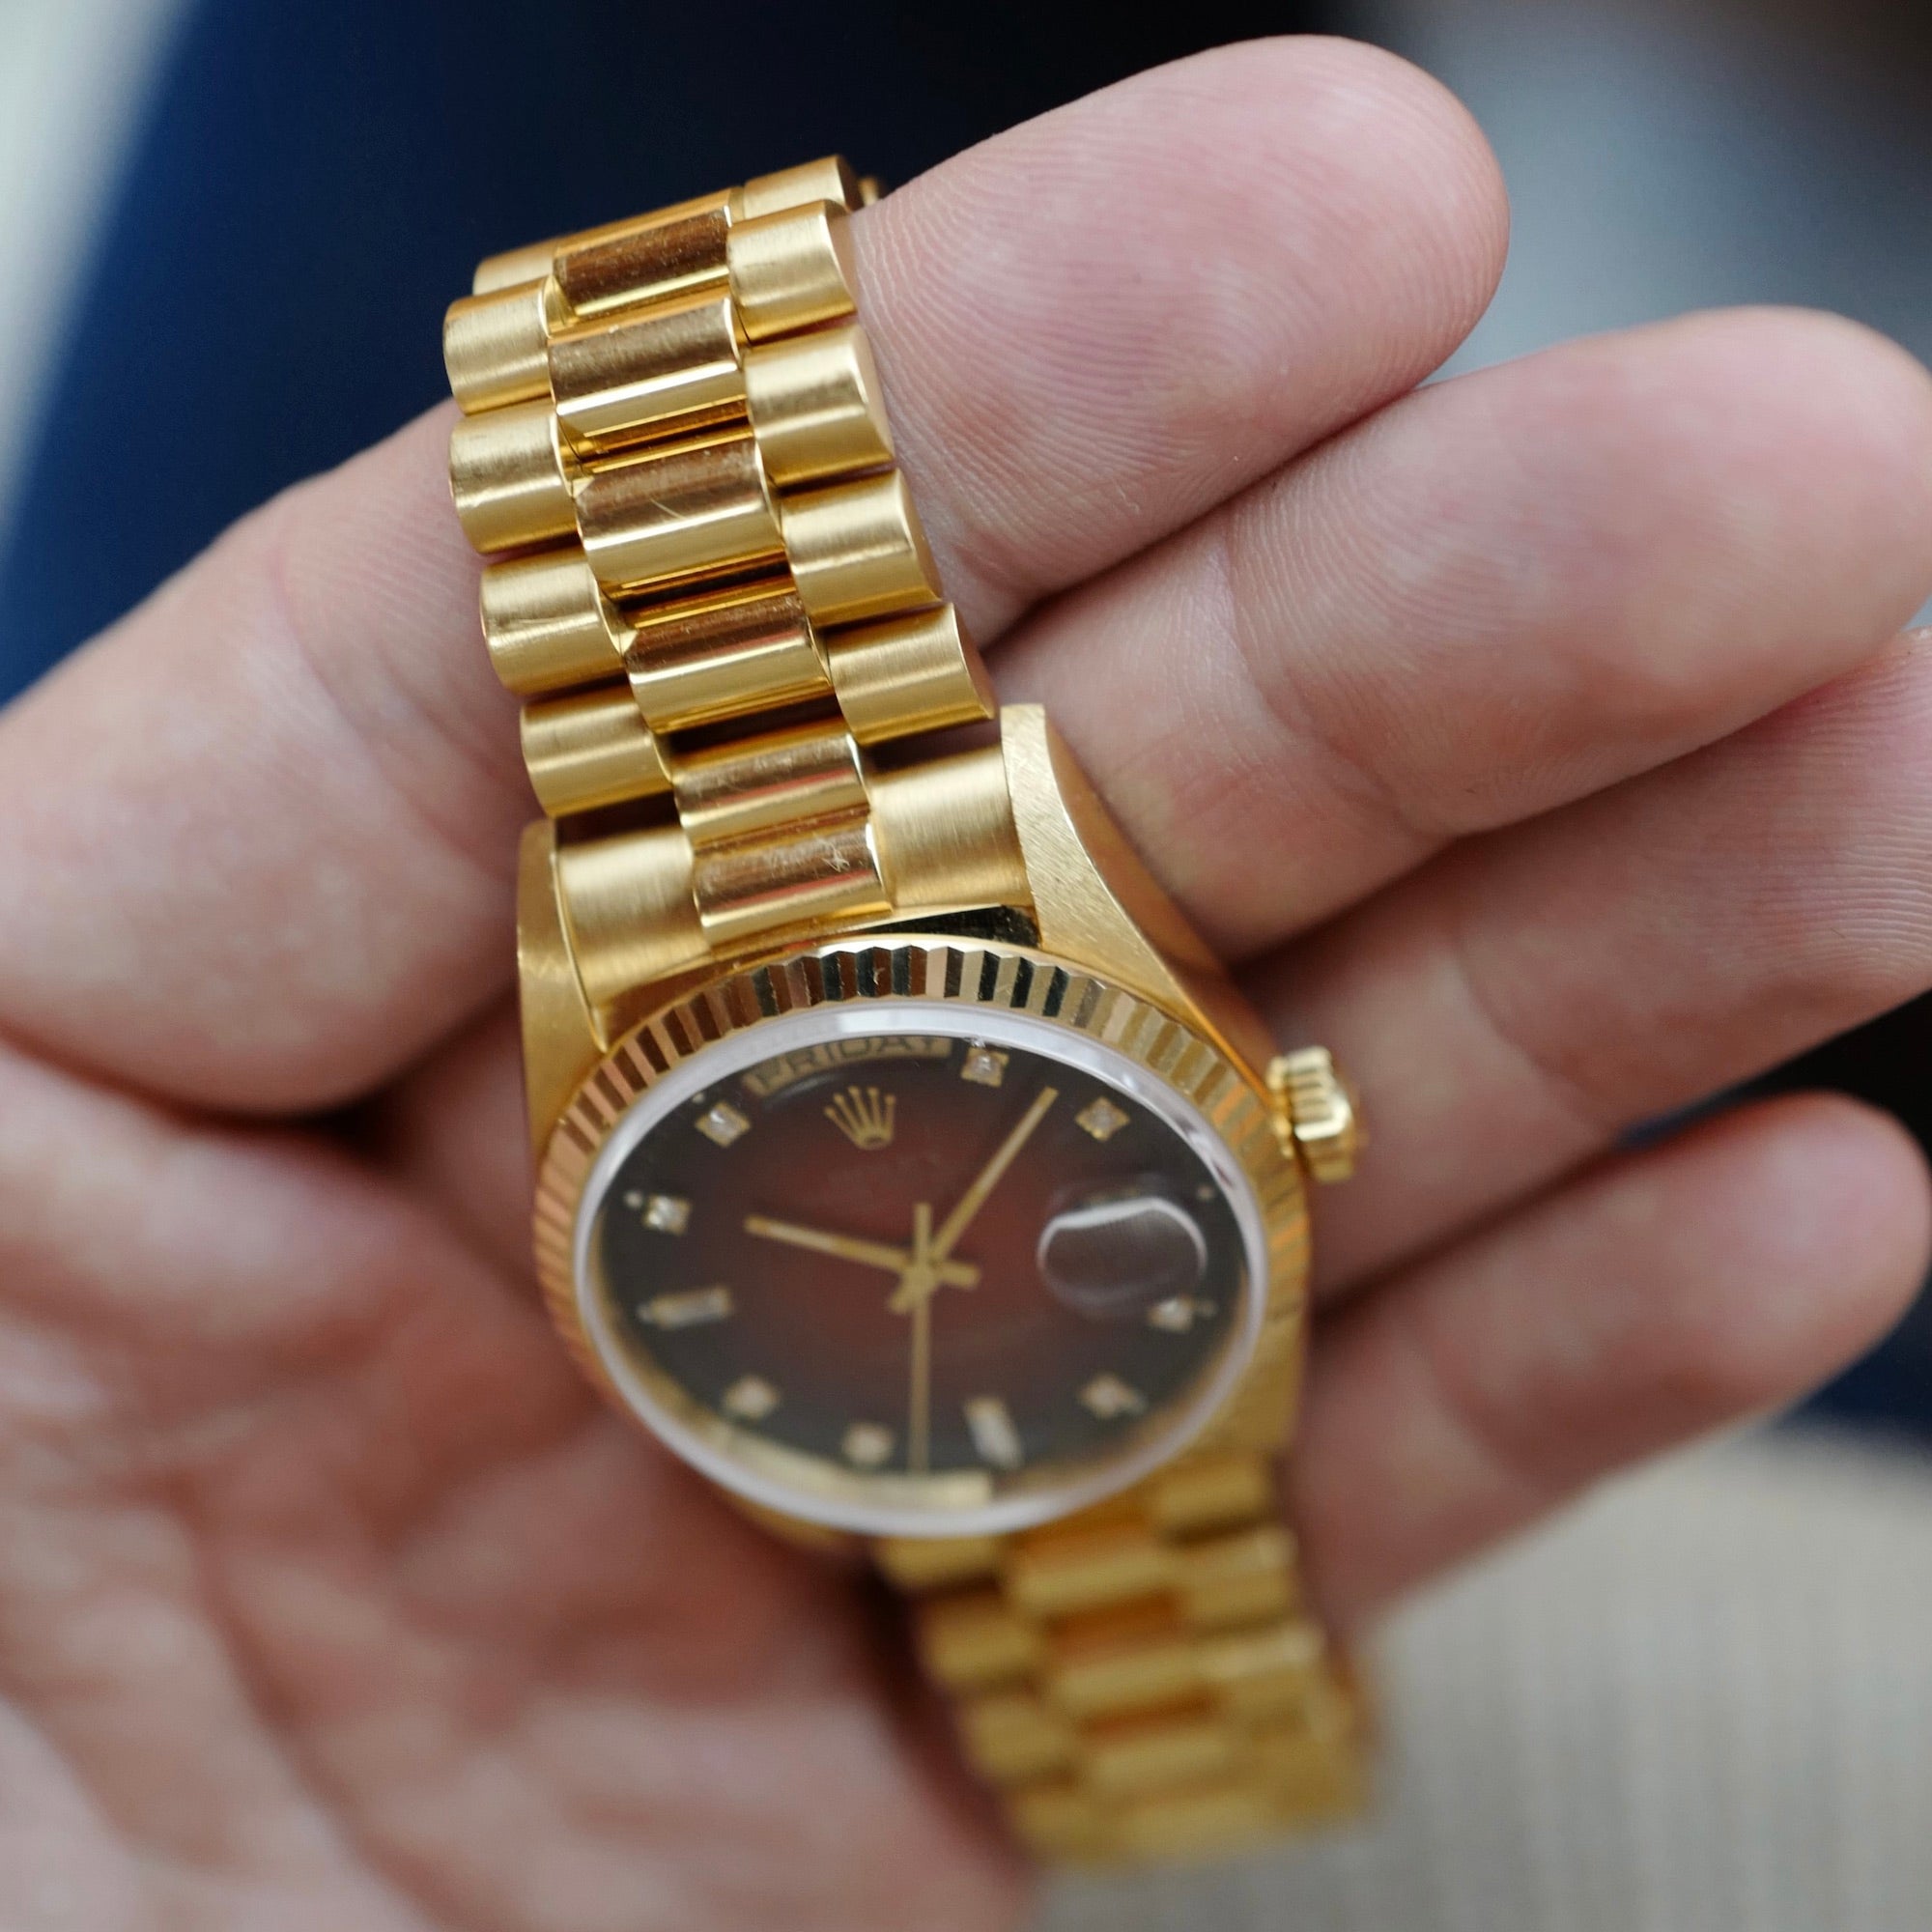 Rolex Yeloow Gold Day Date Ref. 18238 with Red Vignette Dial